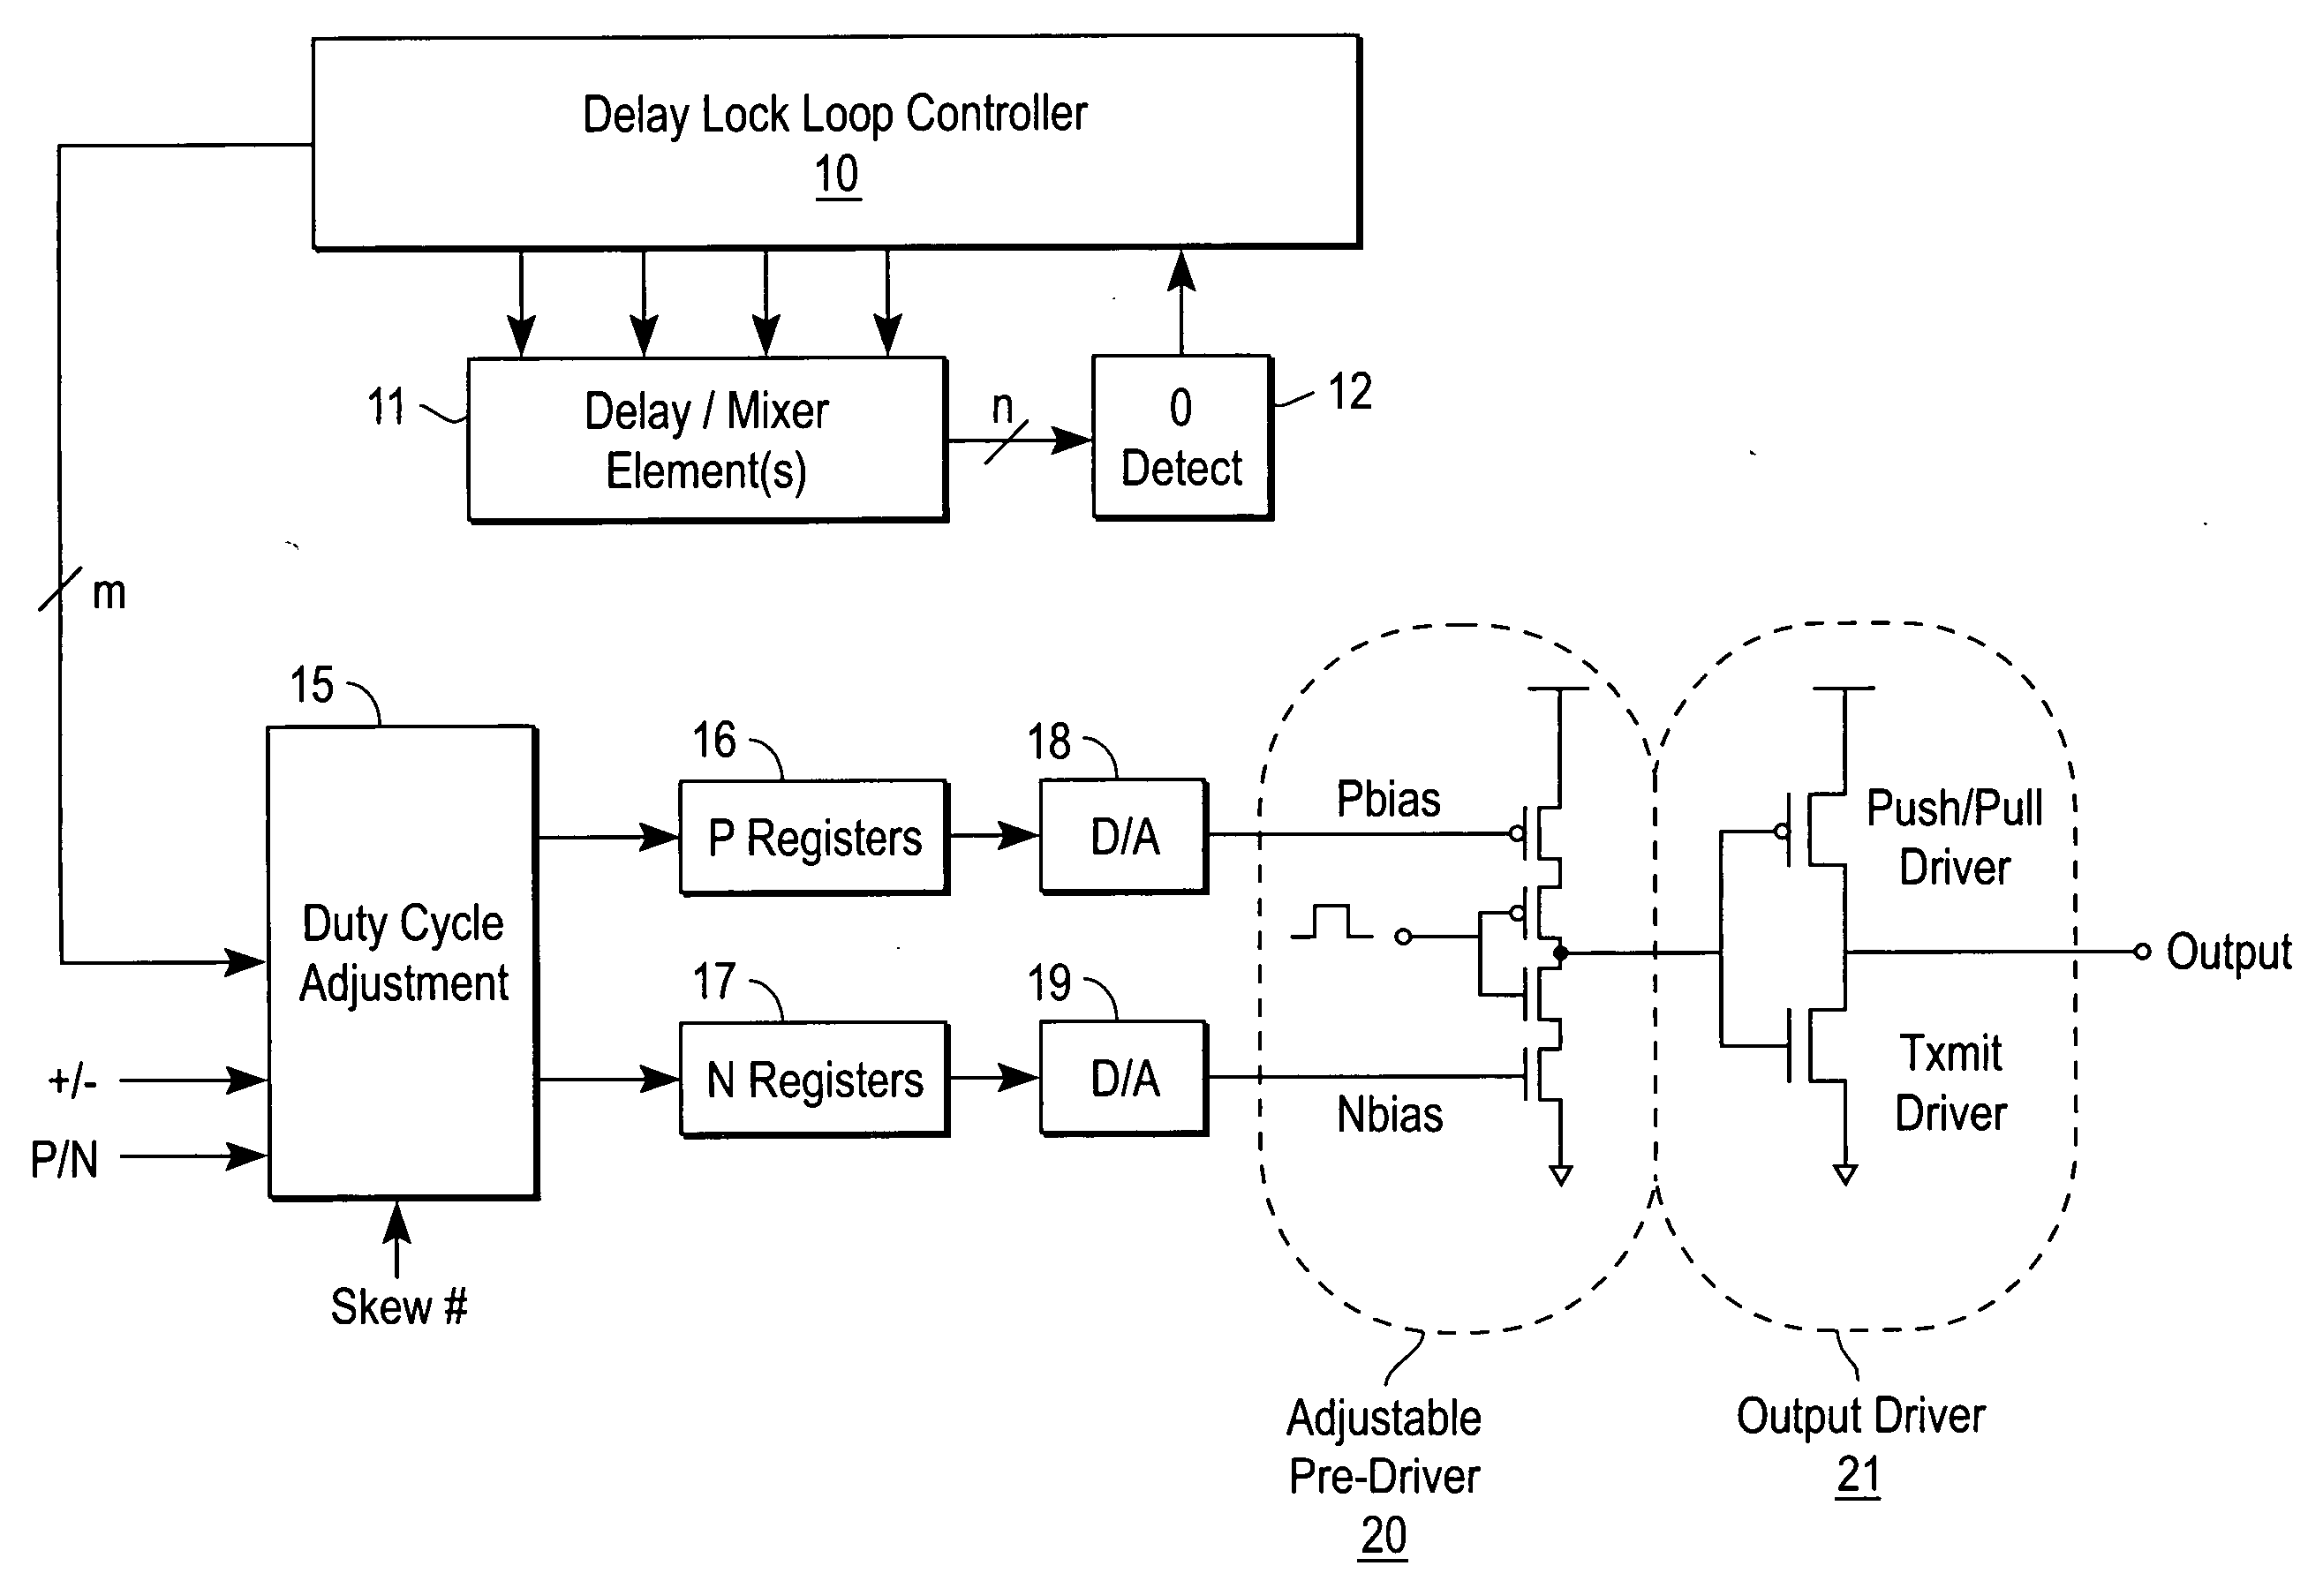 Push-pull output driver